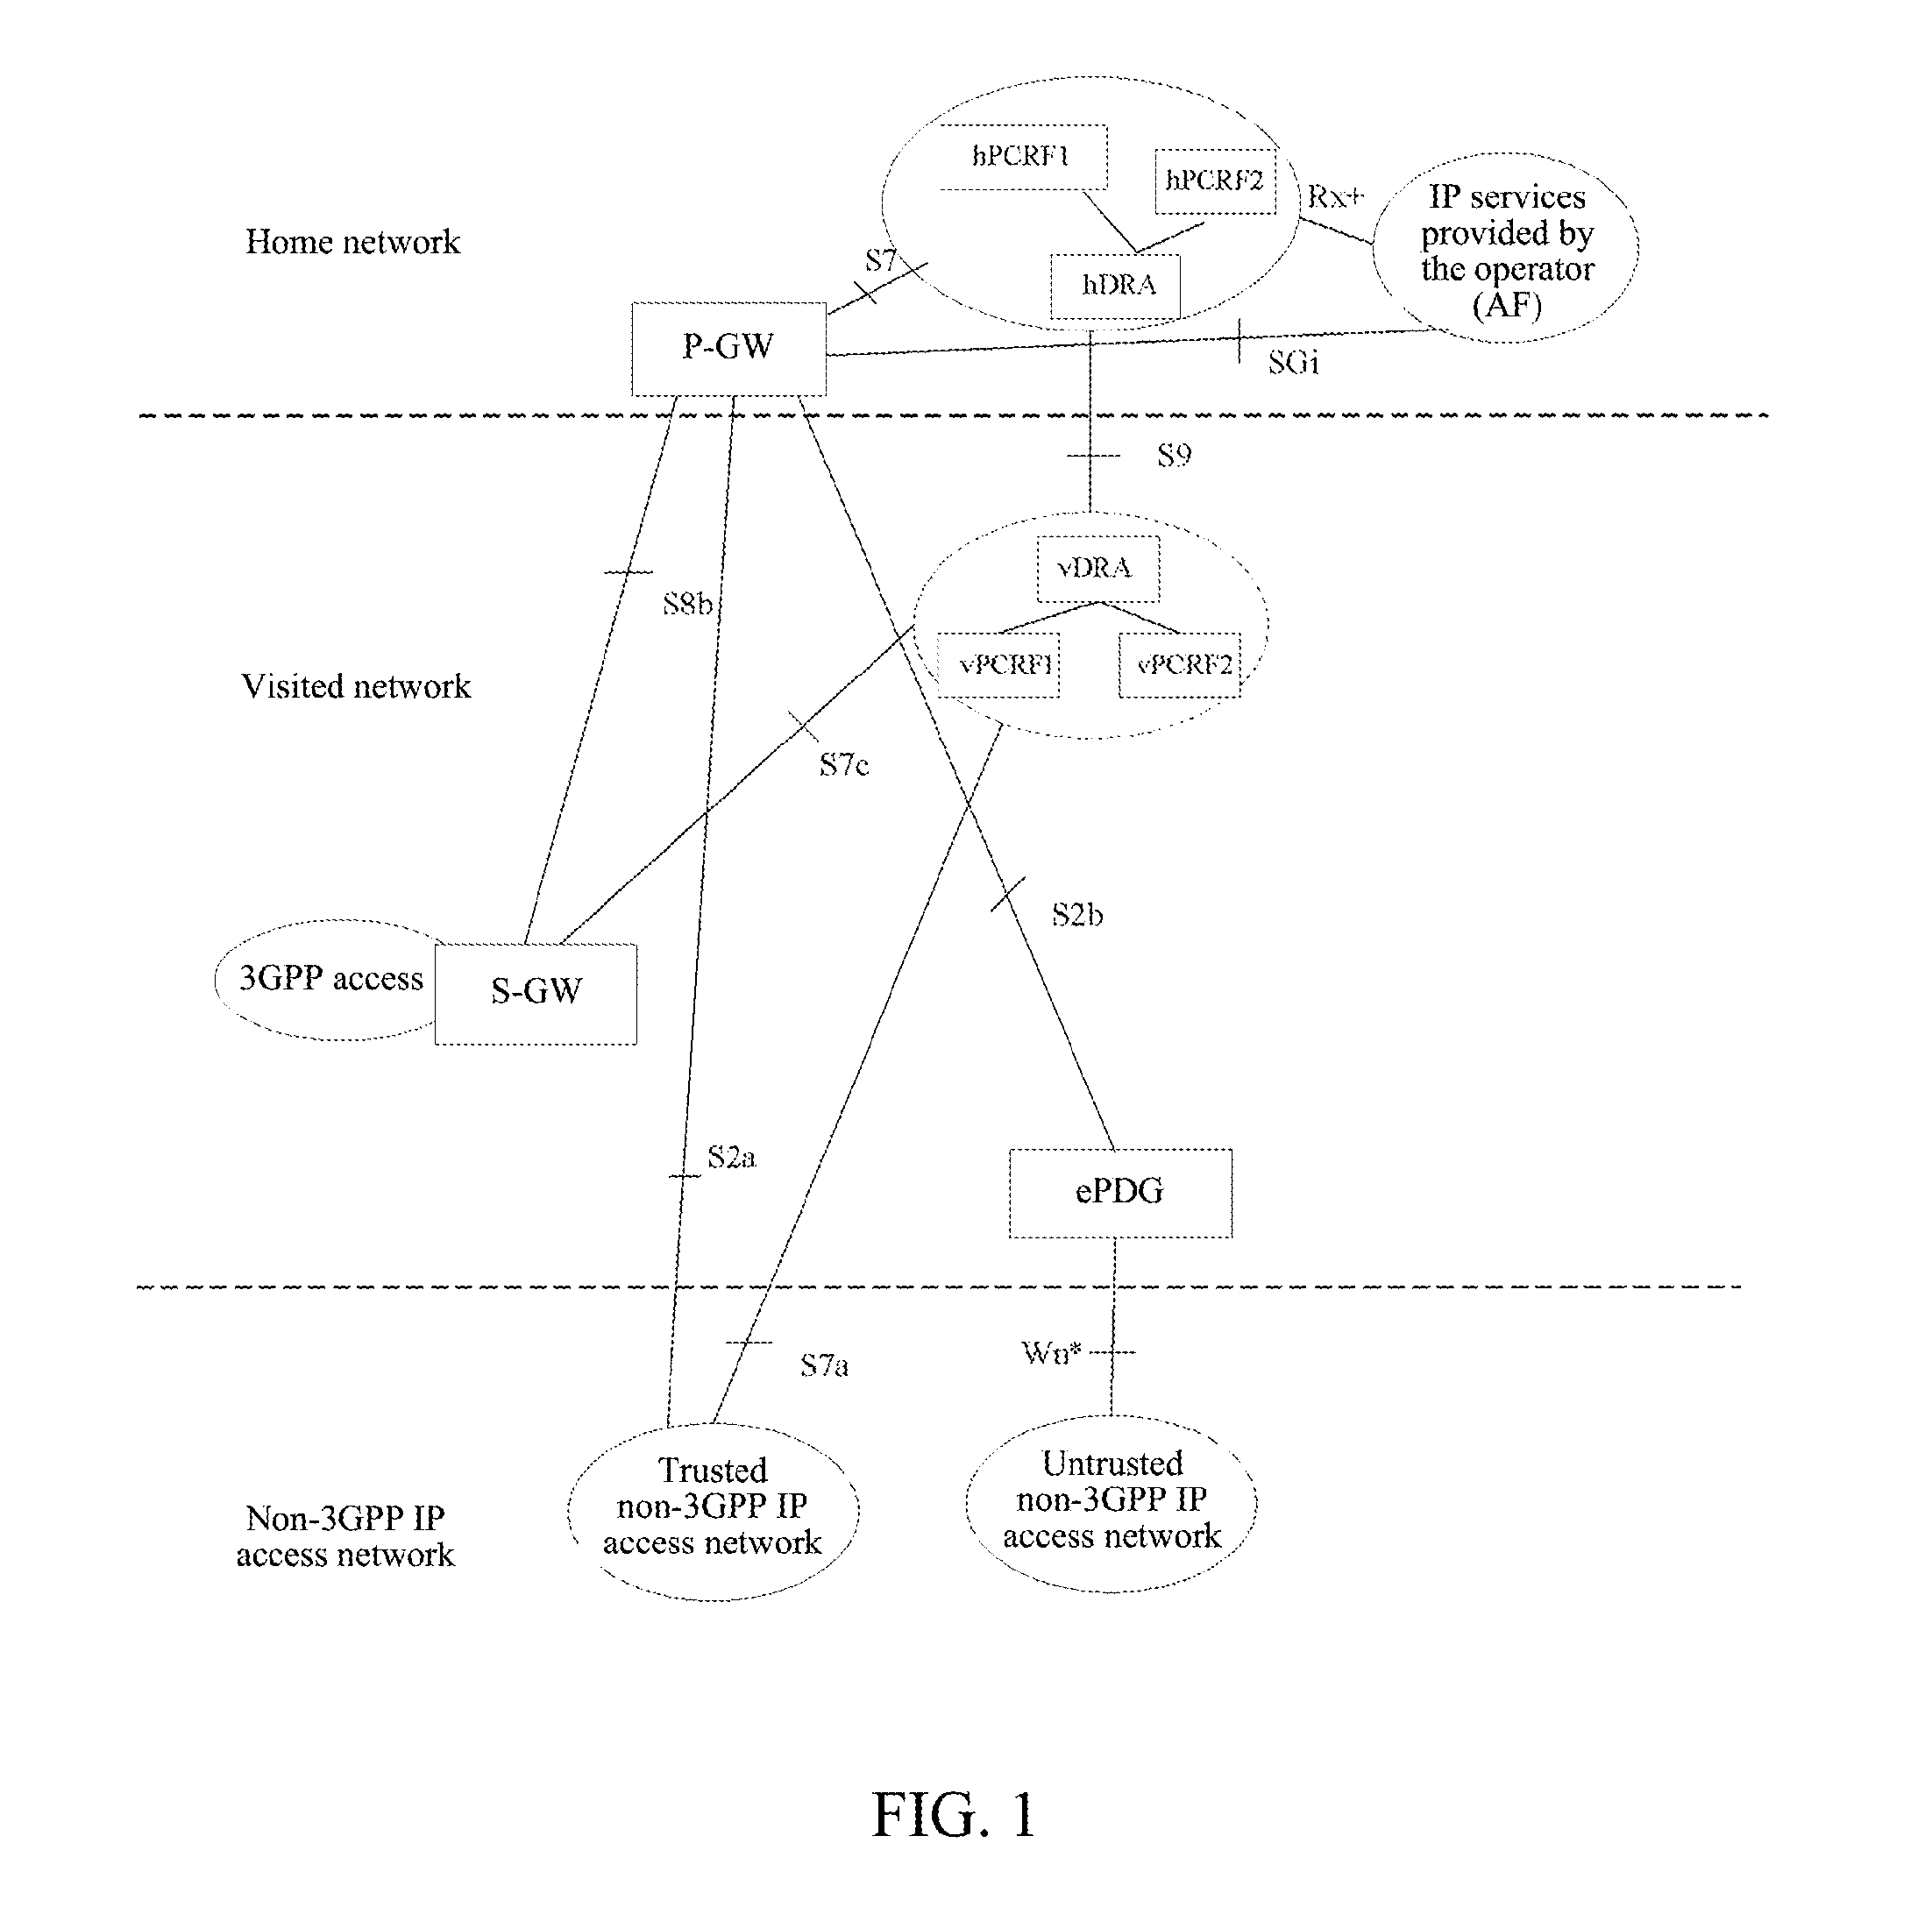 Method for selecting policy and charging rules function